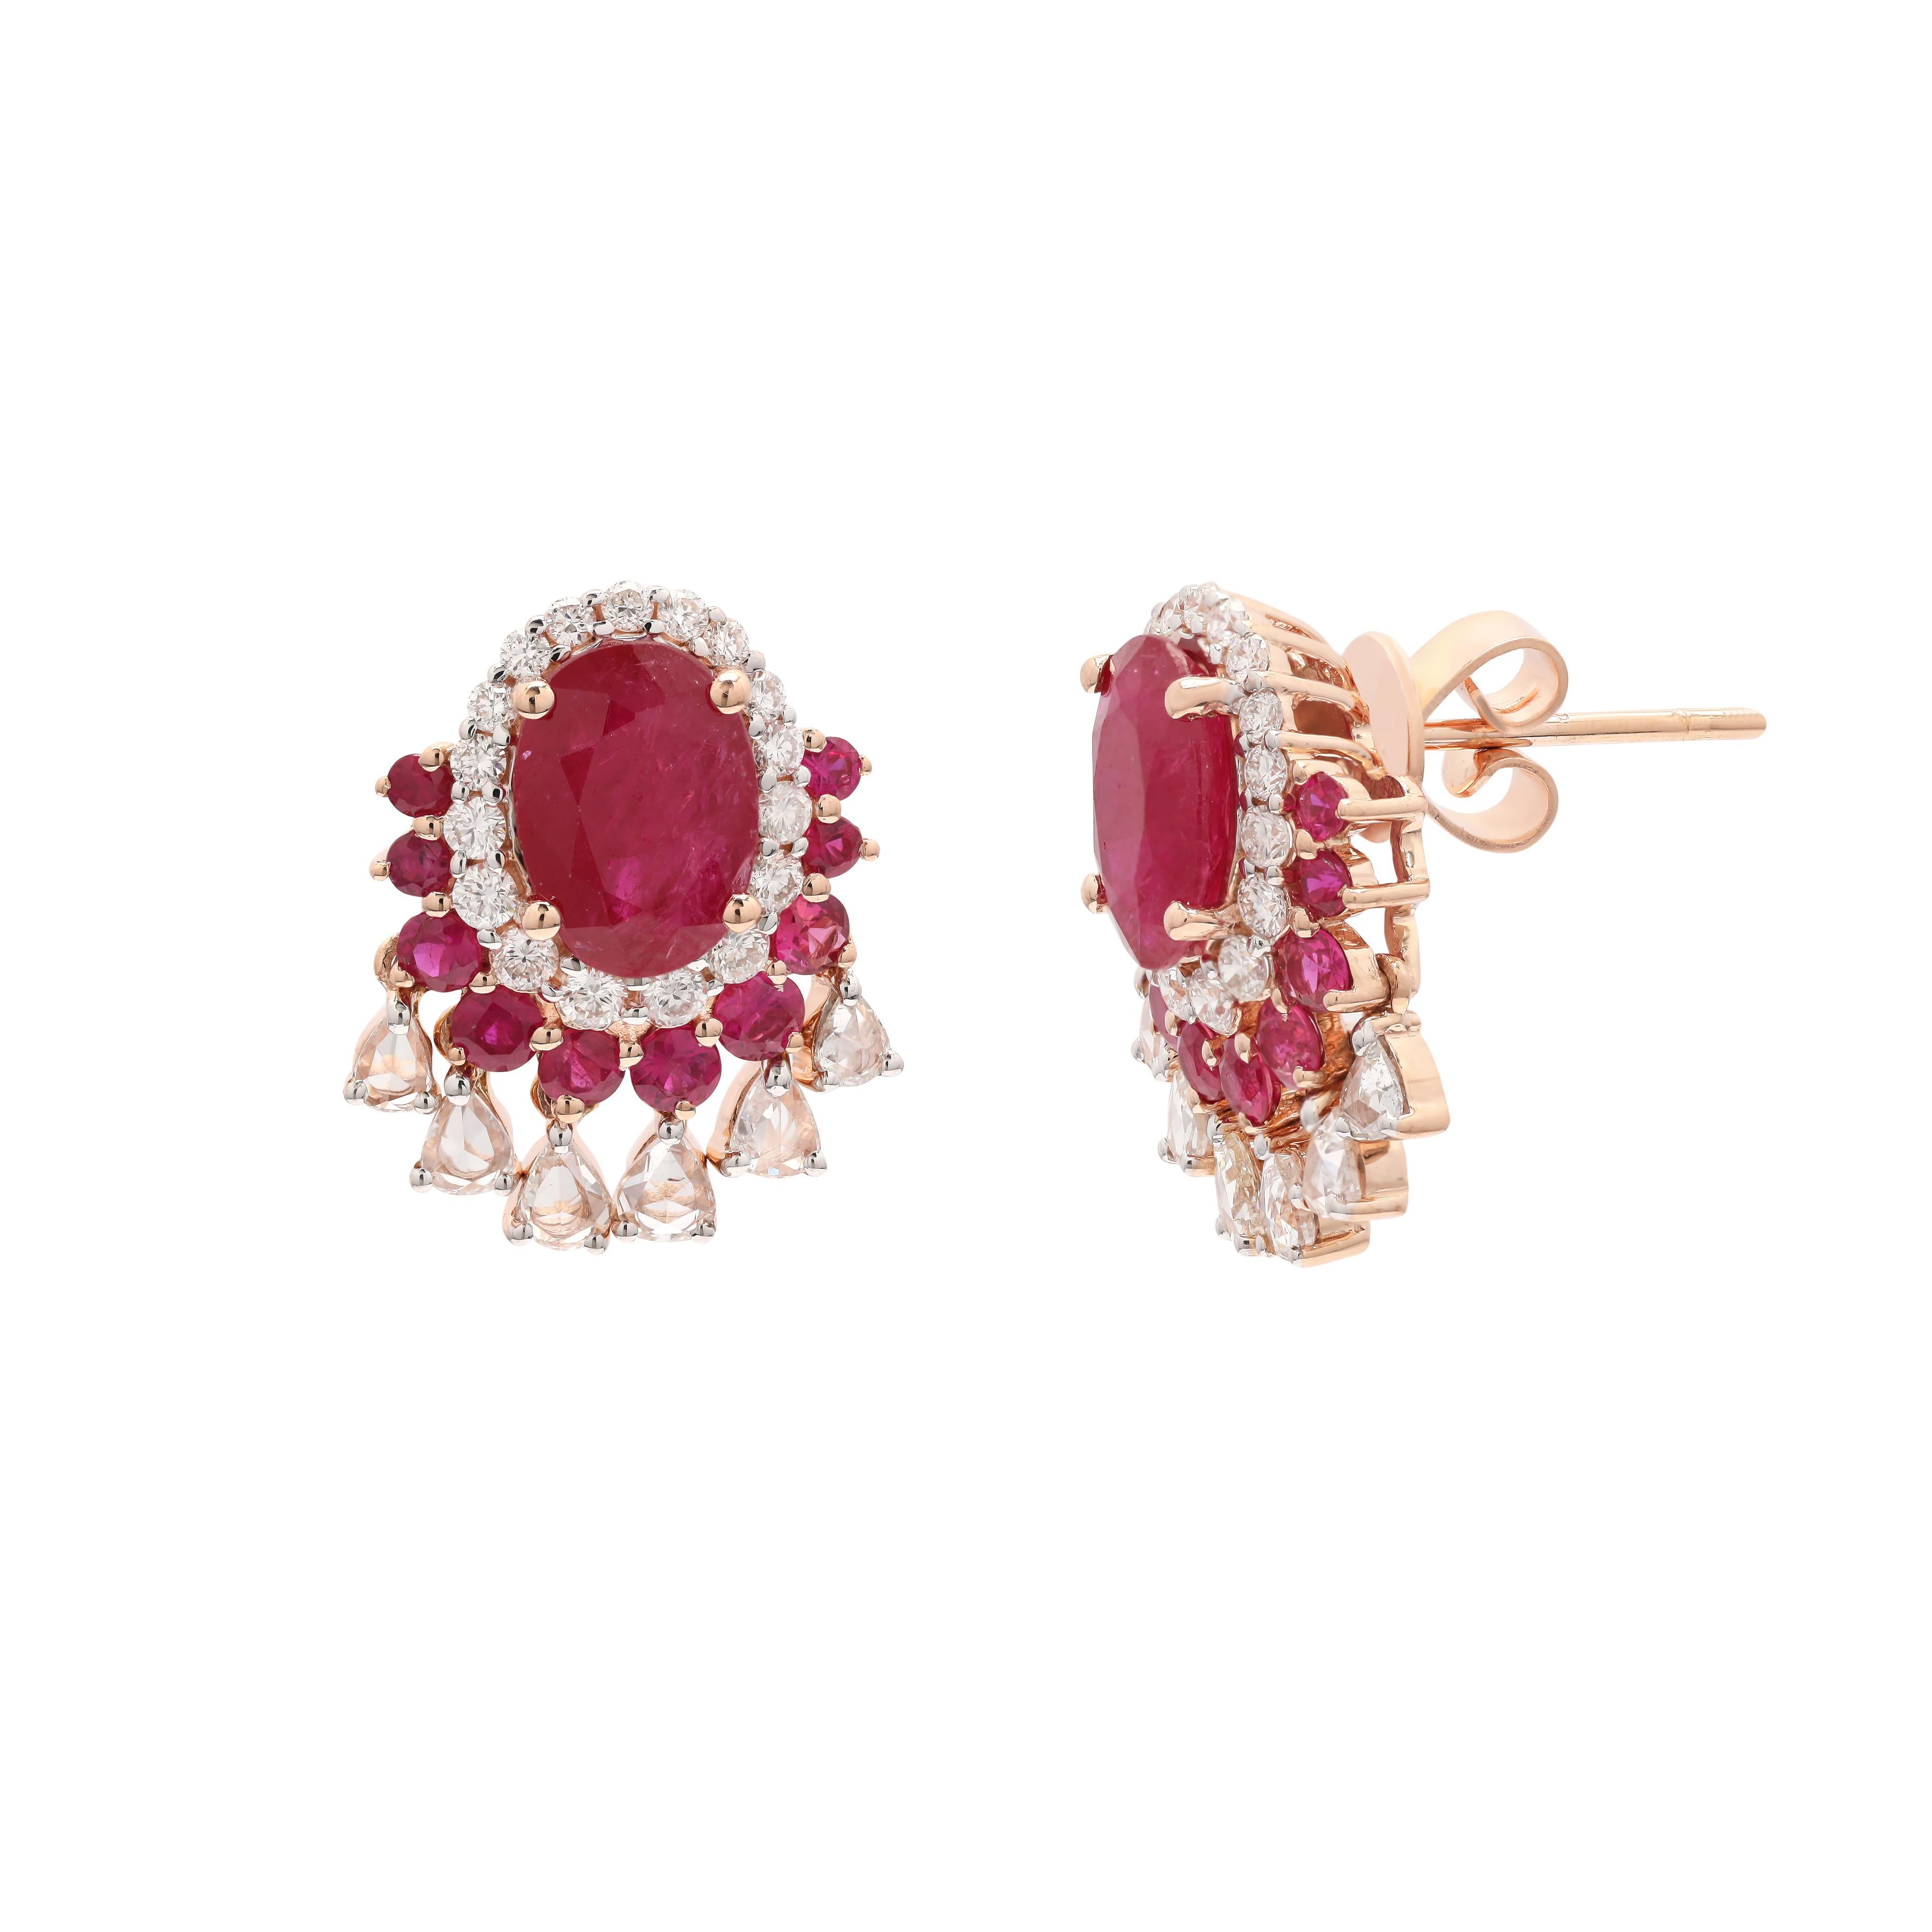 Anglo-Indian 3.19 Carat Natural Ruby Stud Earrings in 14k Rose Gold with Diamonds for Wedding For Sale